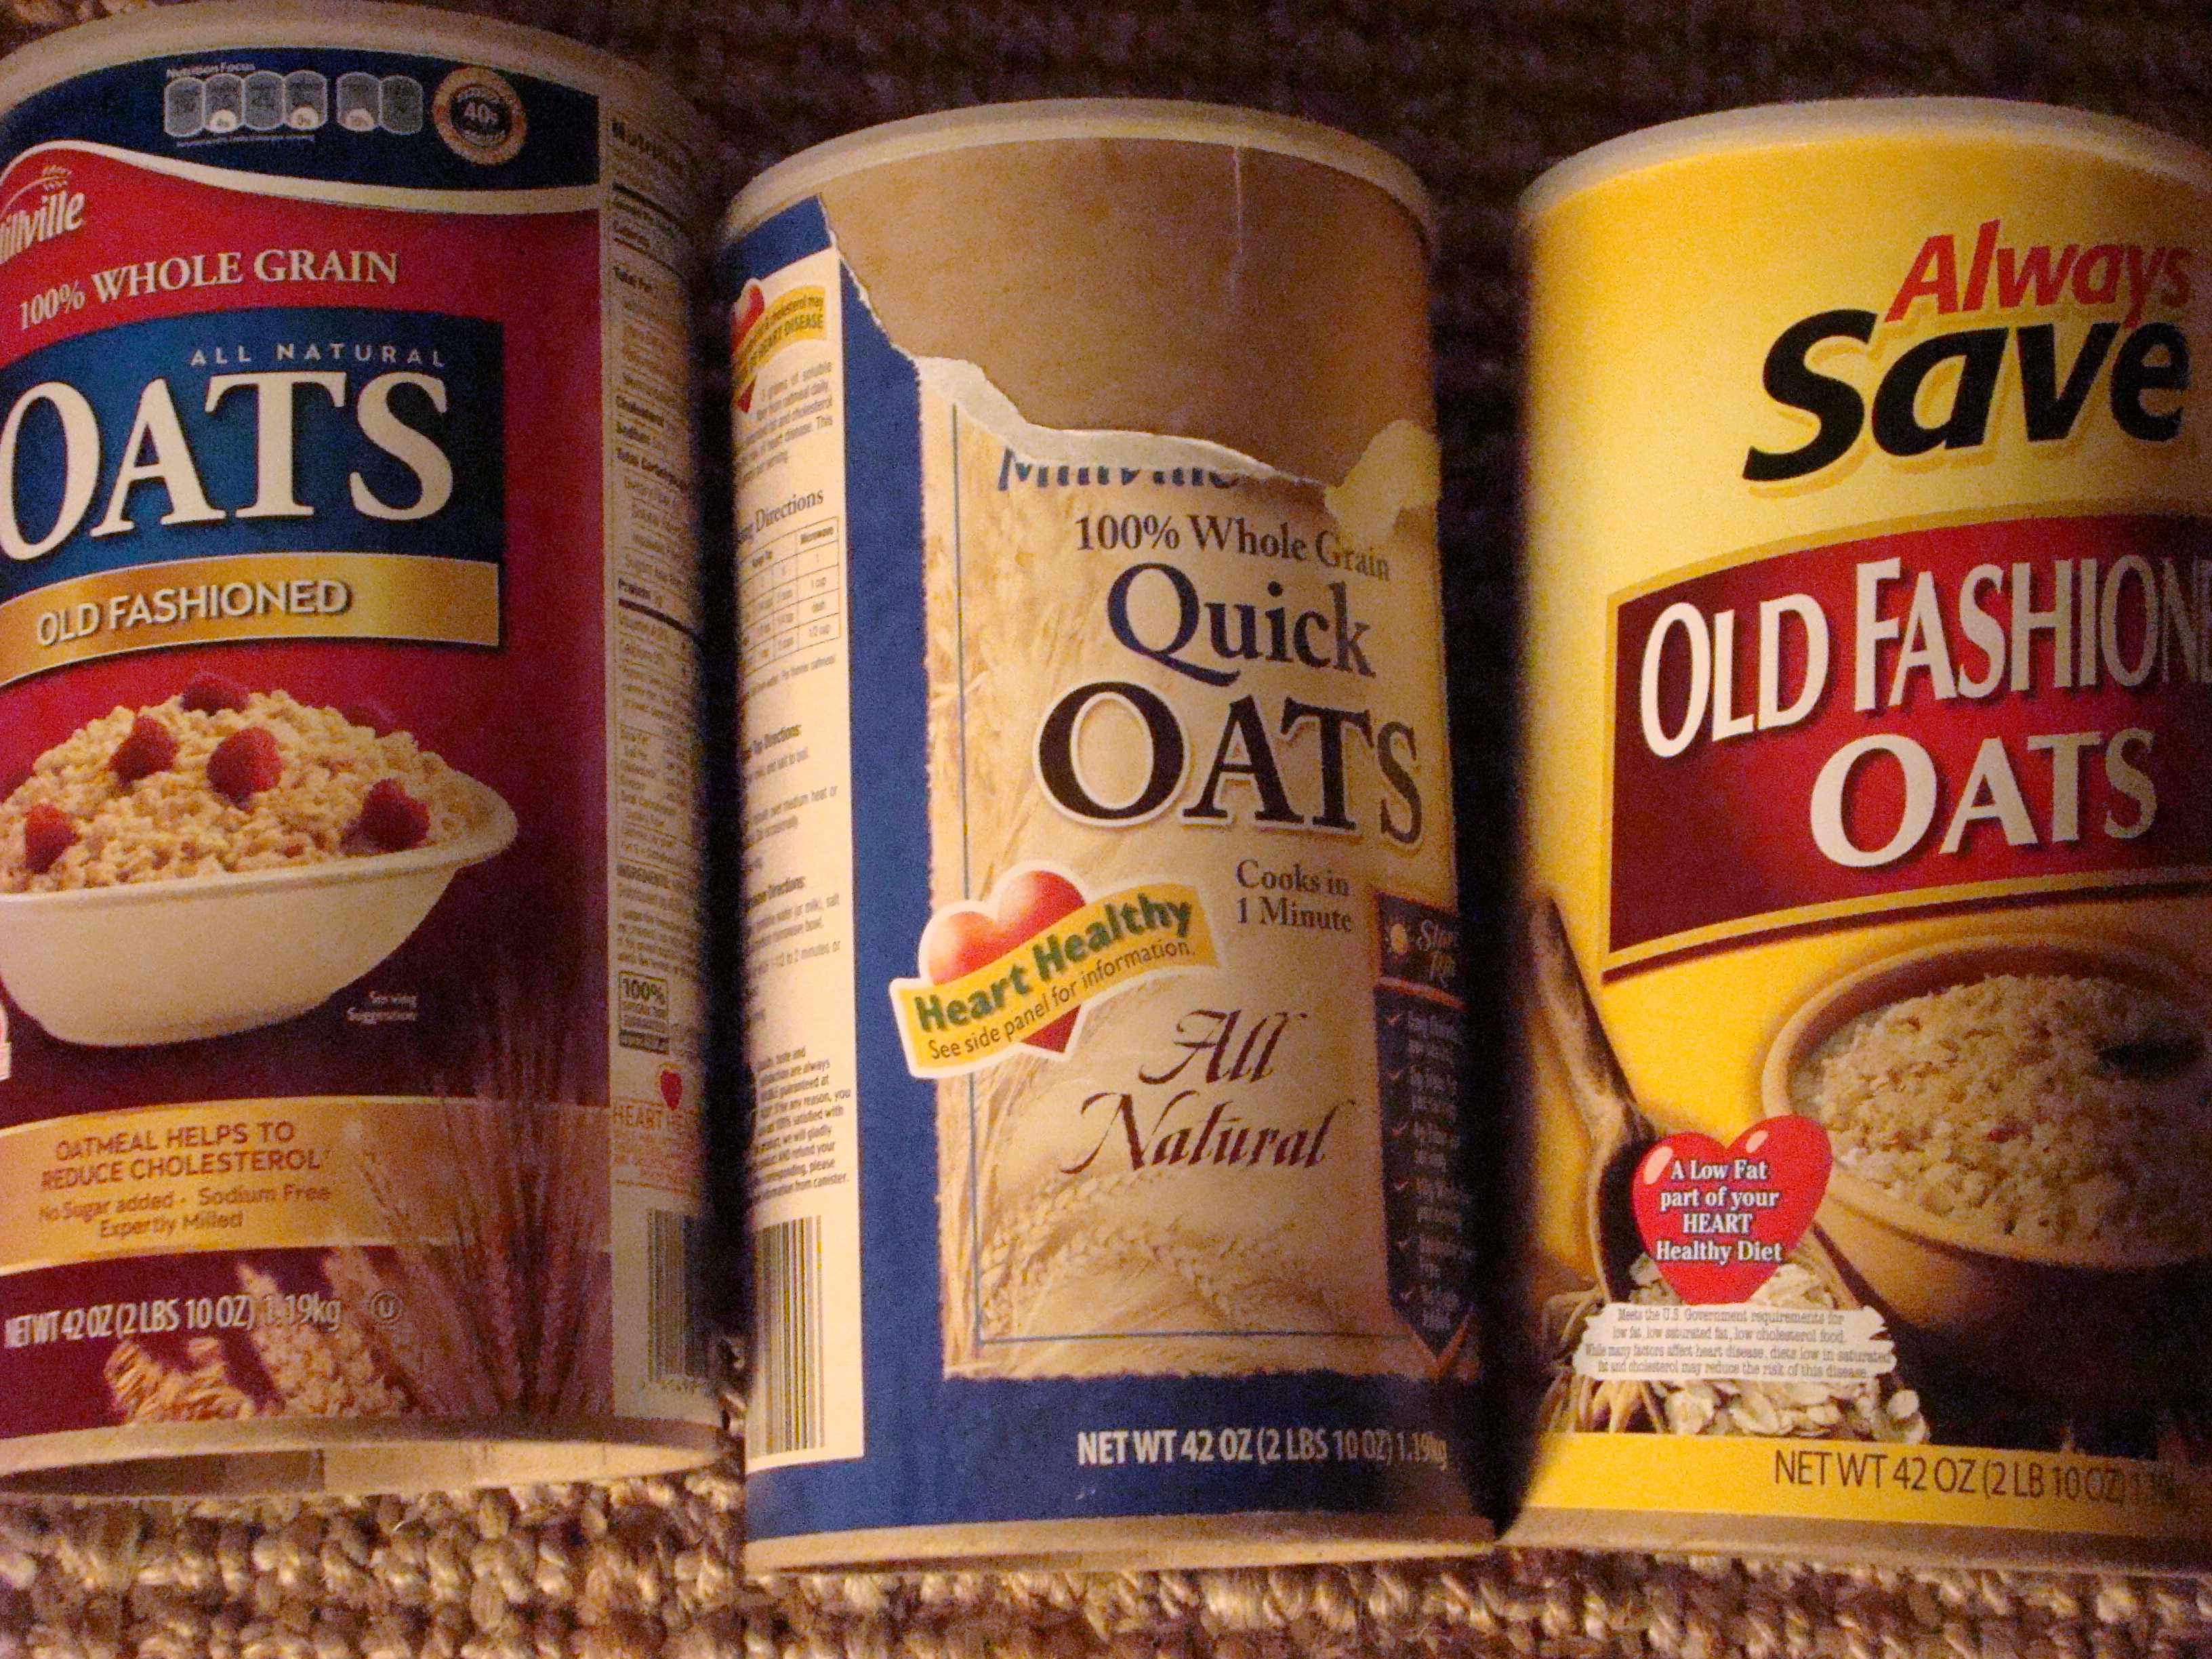 Oatmeal containers for storage